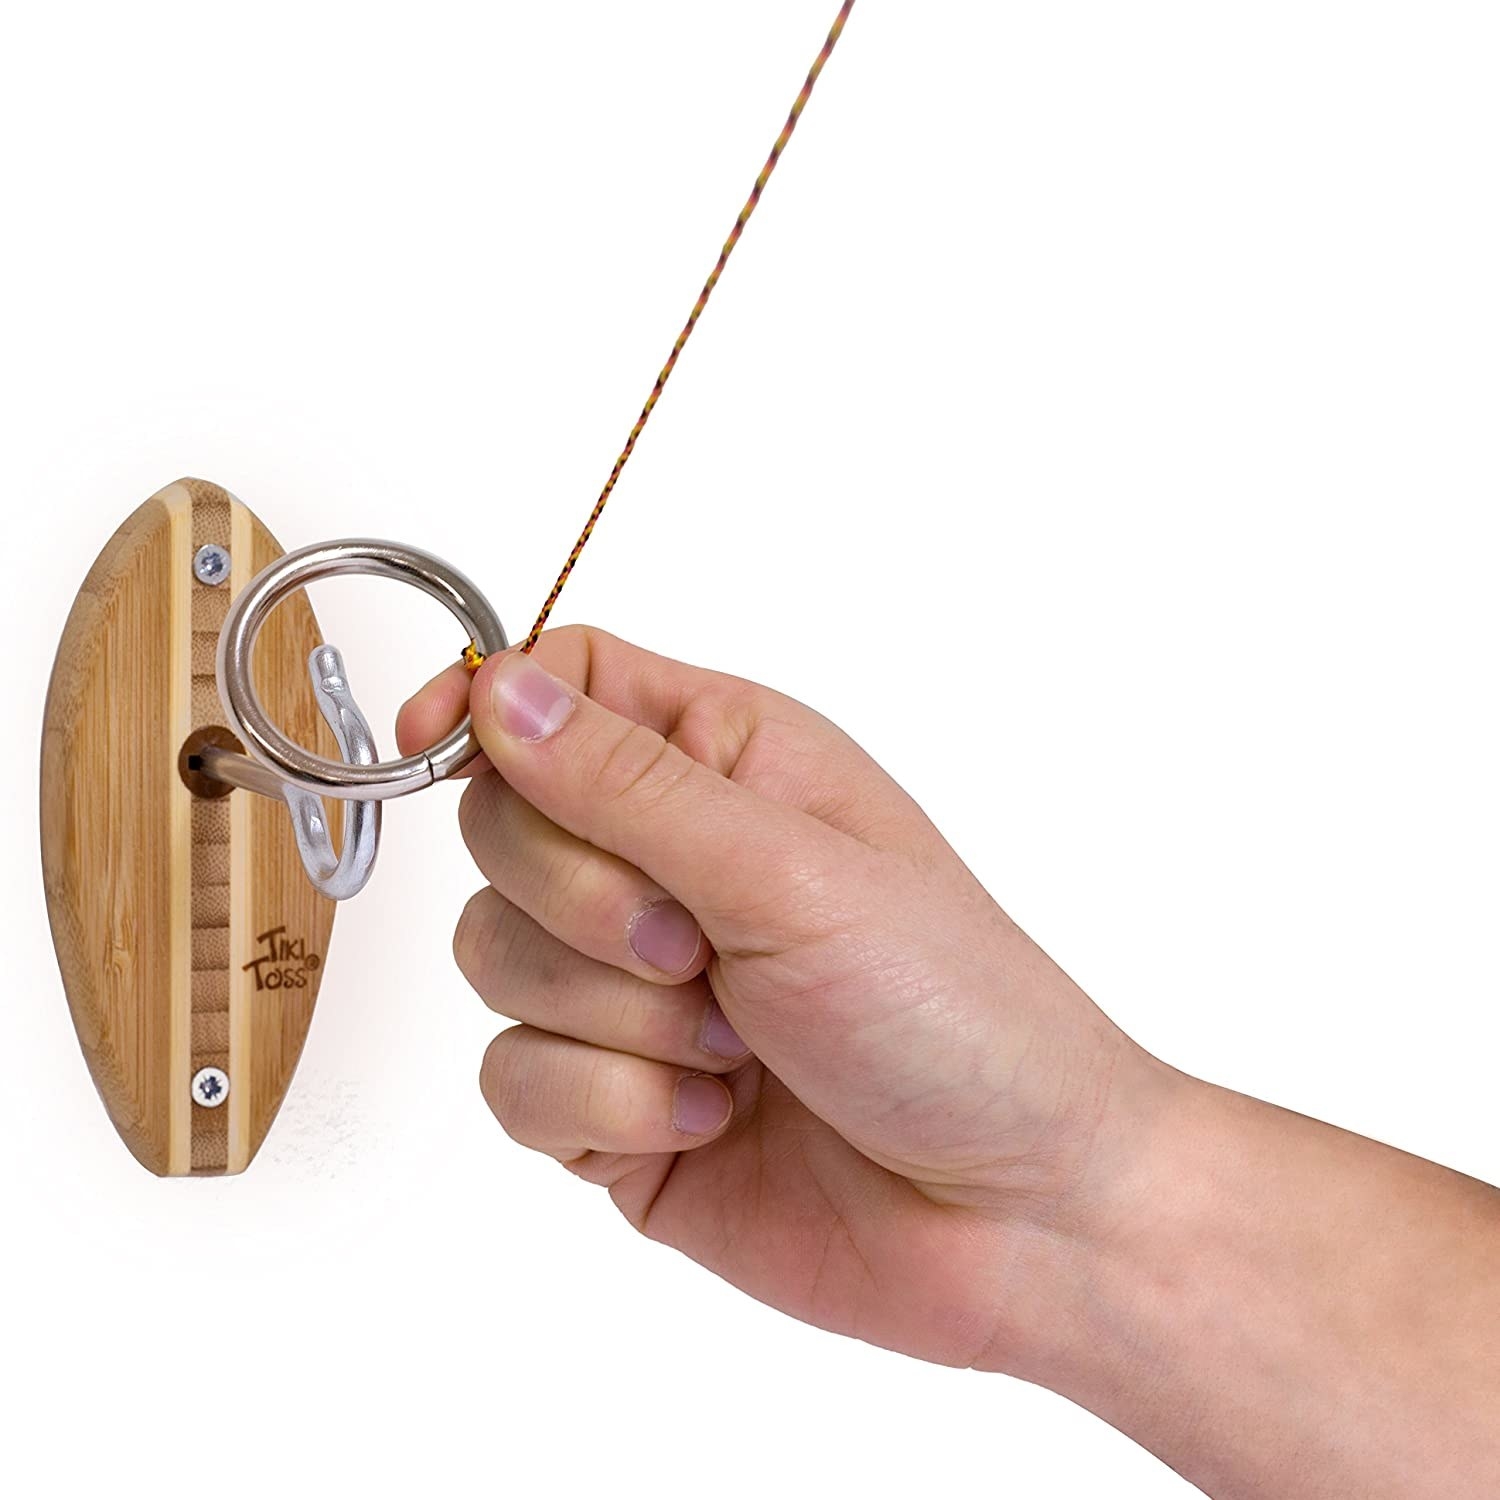 A hand holding the metal ring in front of the wall-mounted wooden board